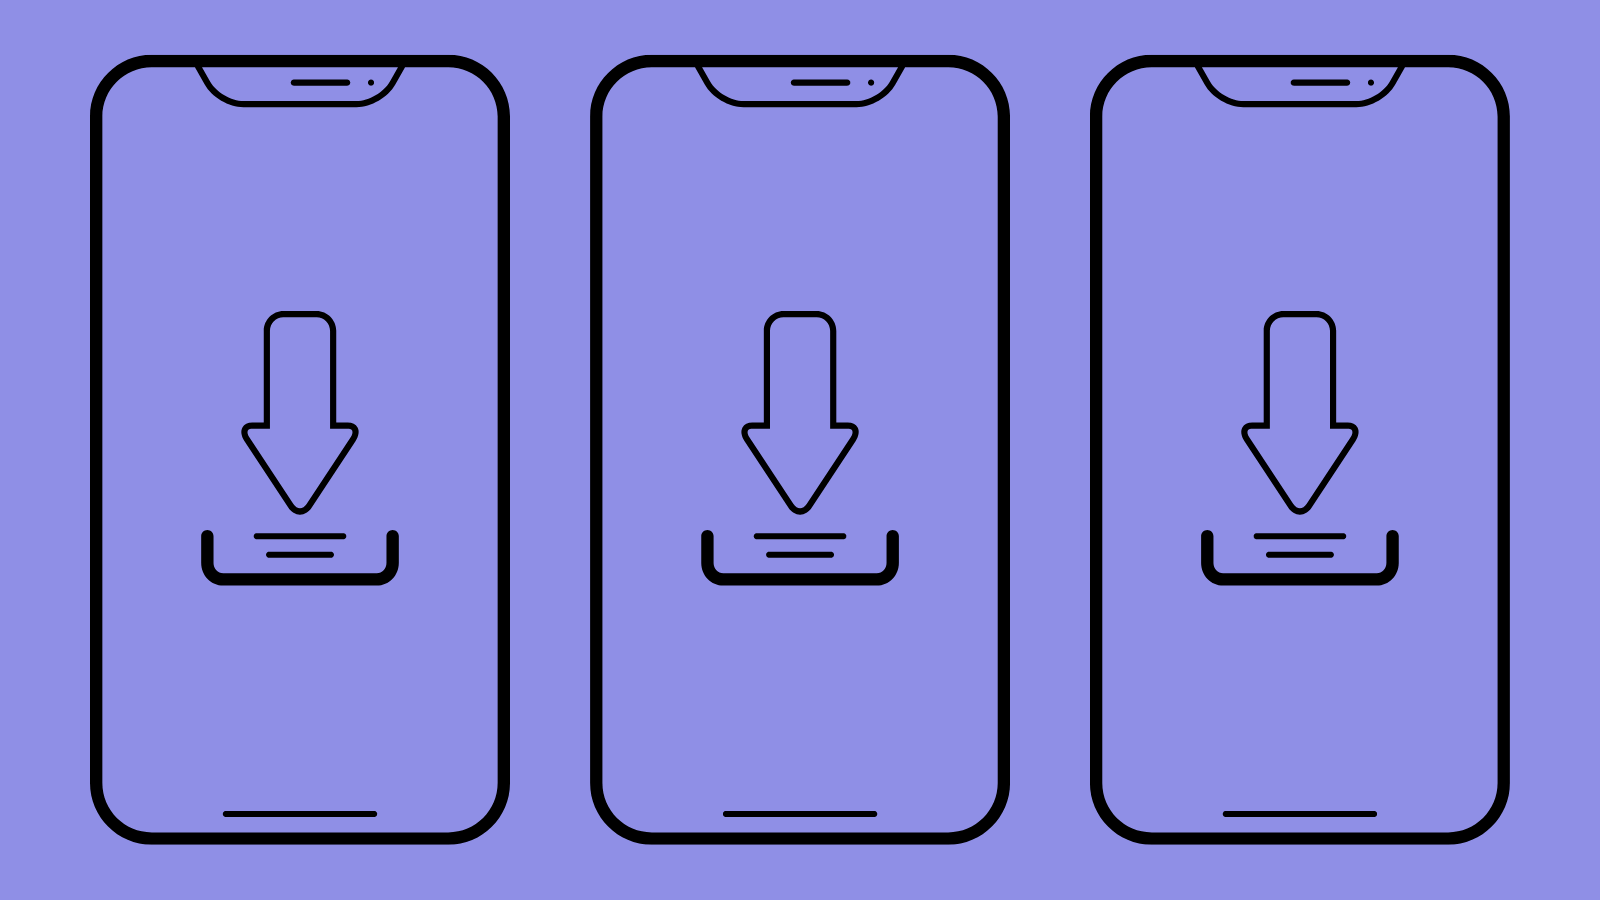 Three identical smartphones with the download icon taking up the whole screen